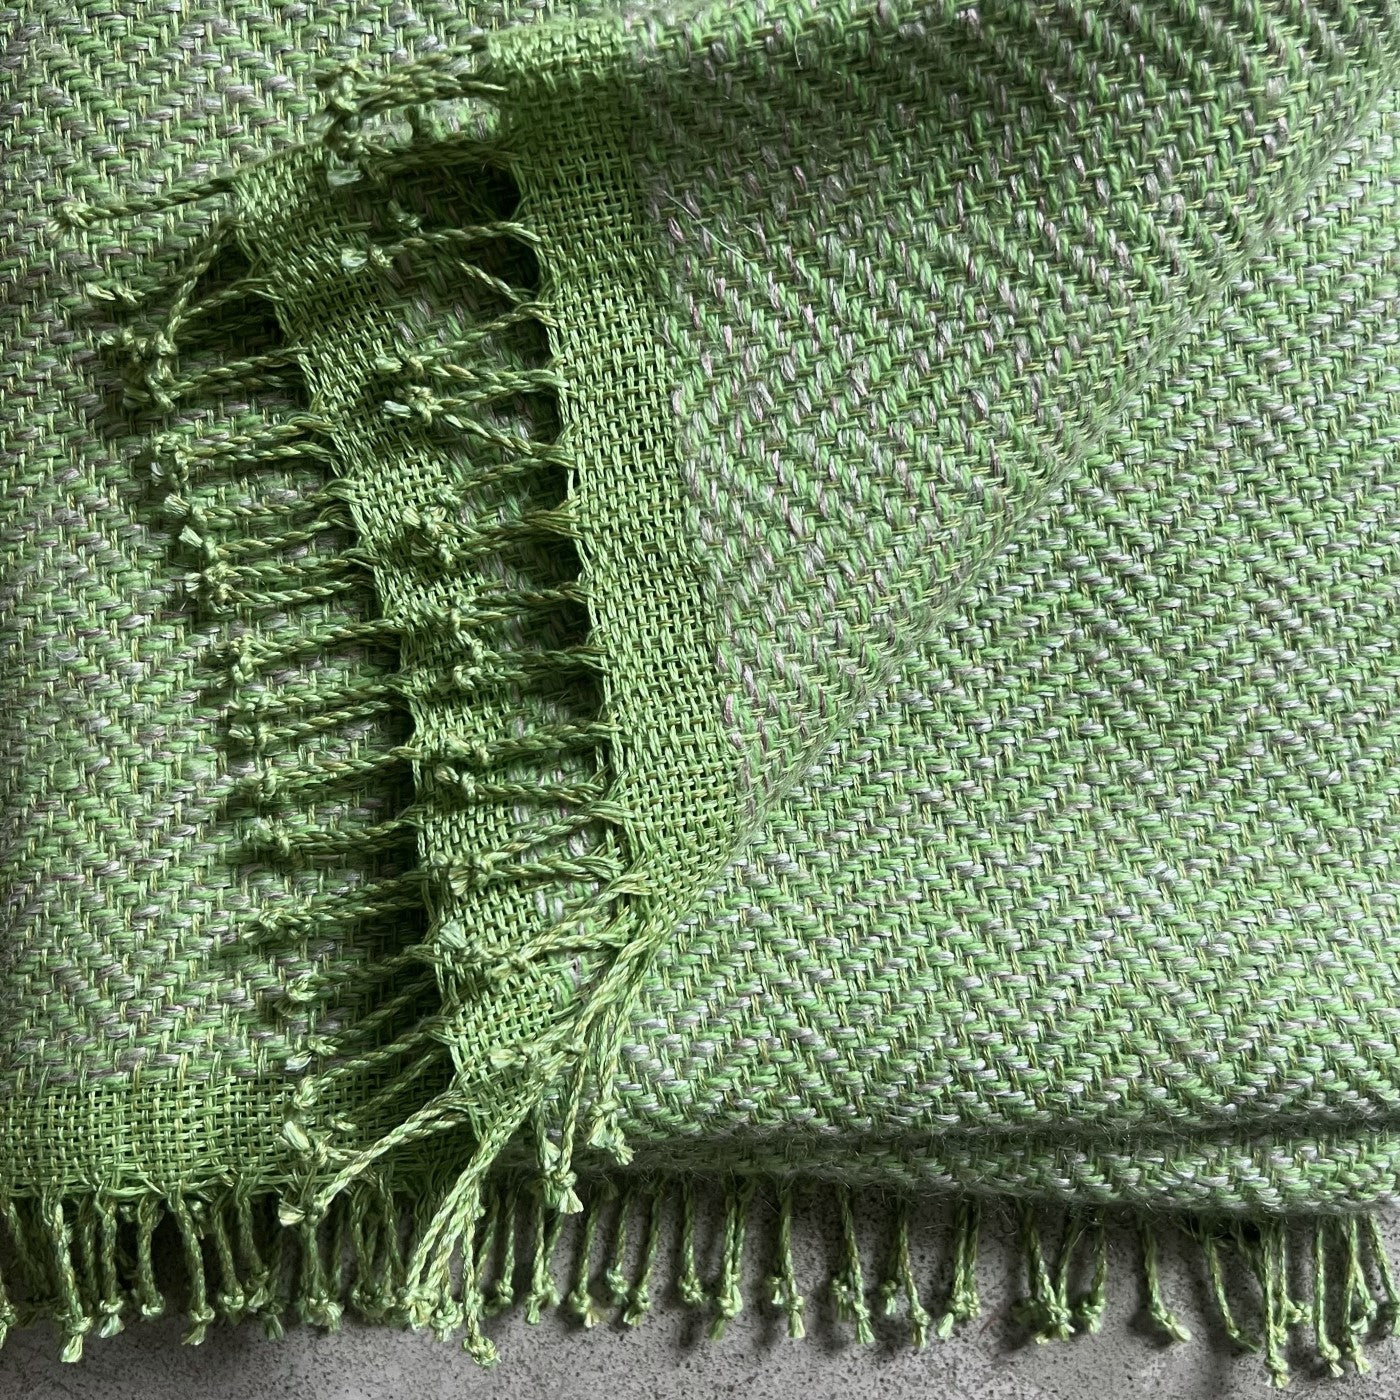 Handwoven linen wool throw Trinis in lime green color with hand-twisted fringes 130x180 cm